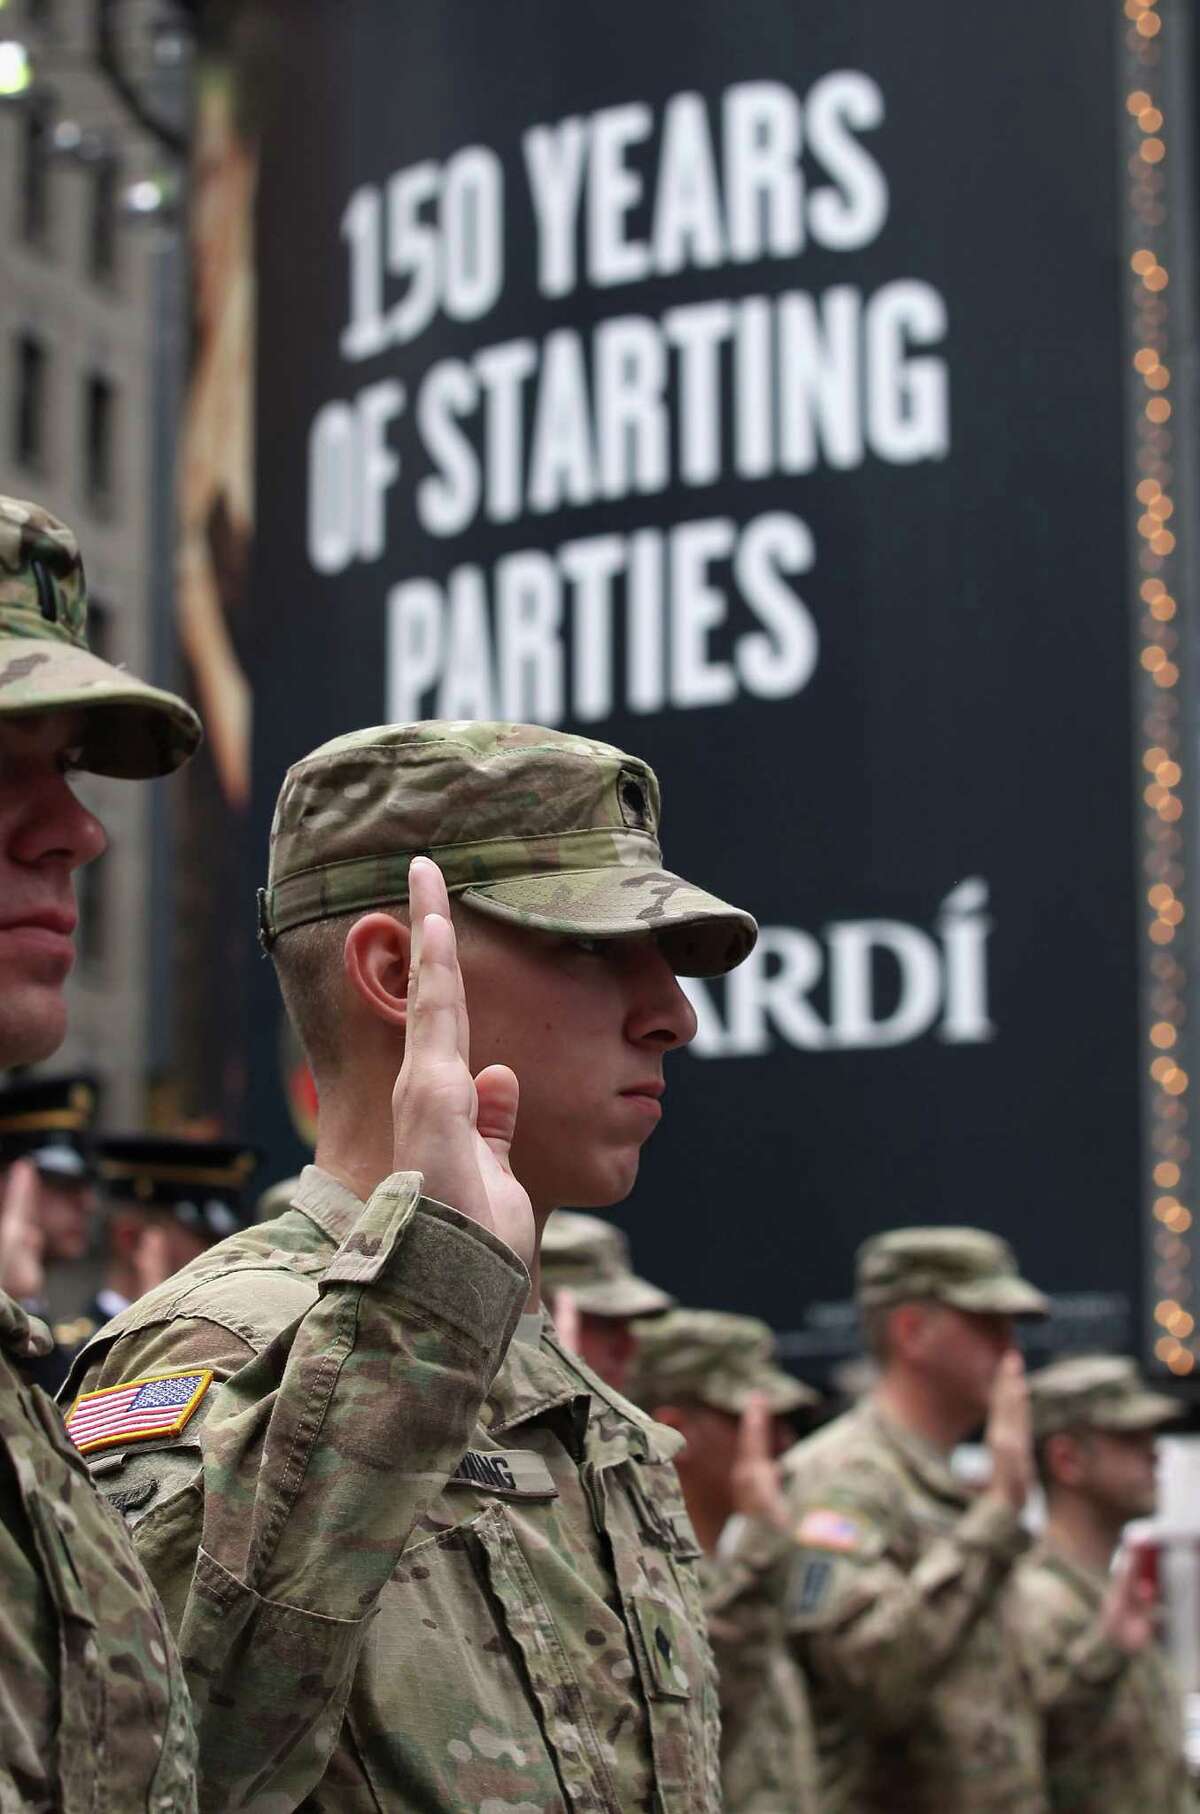 U.S. Army soldiers repeat an oath of allegience as U.S. Army Chief of Staff Gen. Raymond Odierno swears in new recruits on June 14, 2012 in Times Square in New York City. Odierno, fellow Army troops and New York dignitaries marked the 237th anniversary of the U.S. Army at the event.